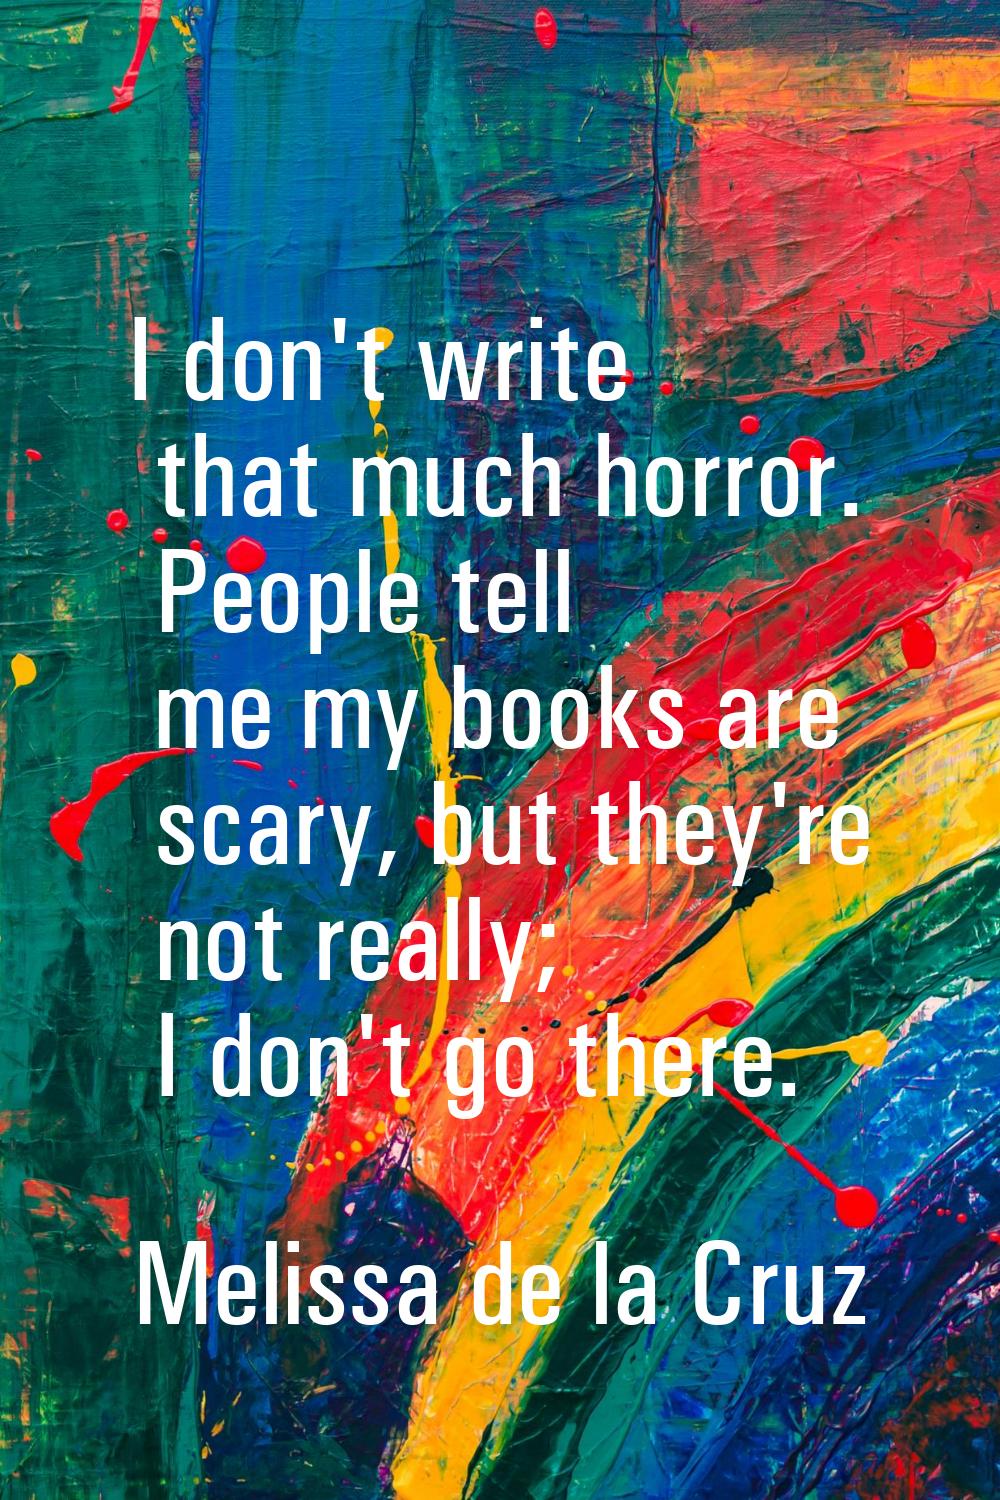 I don't write that much horror. People tell me my books are scary, but they're not really; I don't 